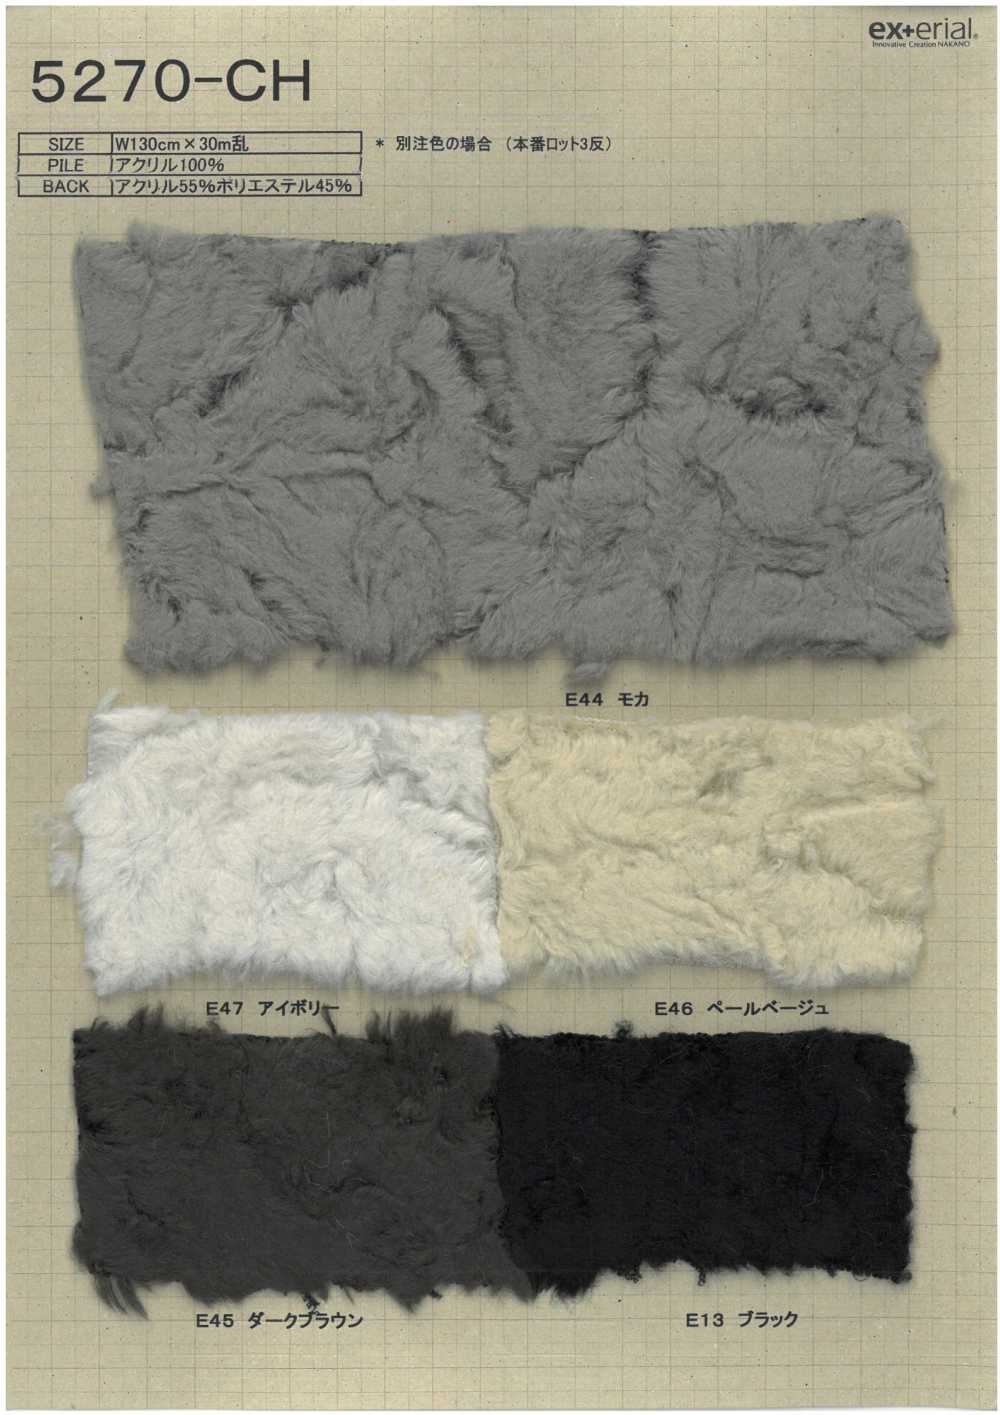 5270-CH Craft Fur [Vintage Cotton][Textile / Fabric] Nakano Stockinette Industry